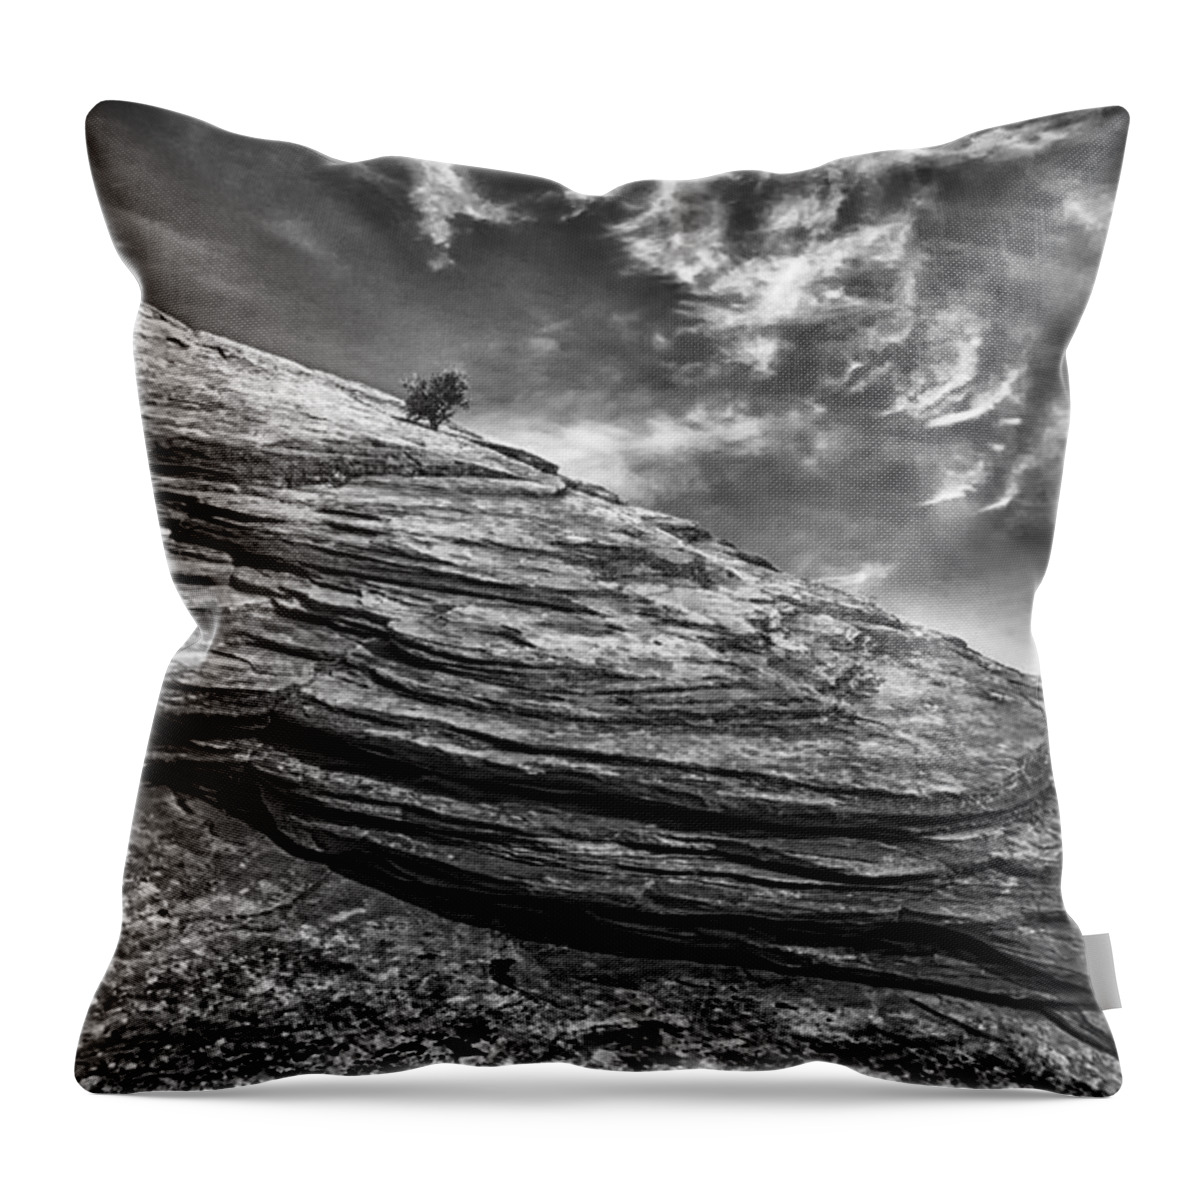  Throw Pillow featuring the photograph Survivor by Ghostwinds Photography